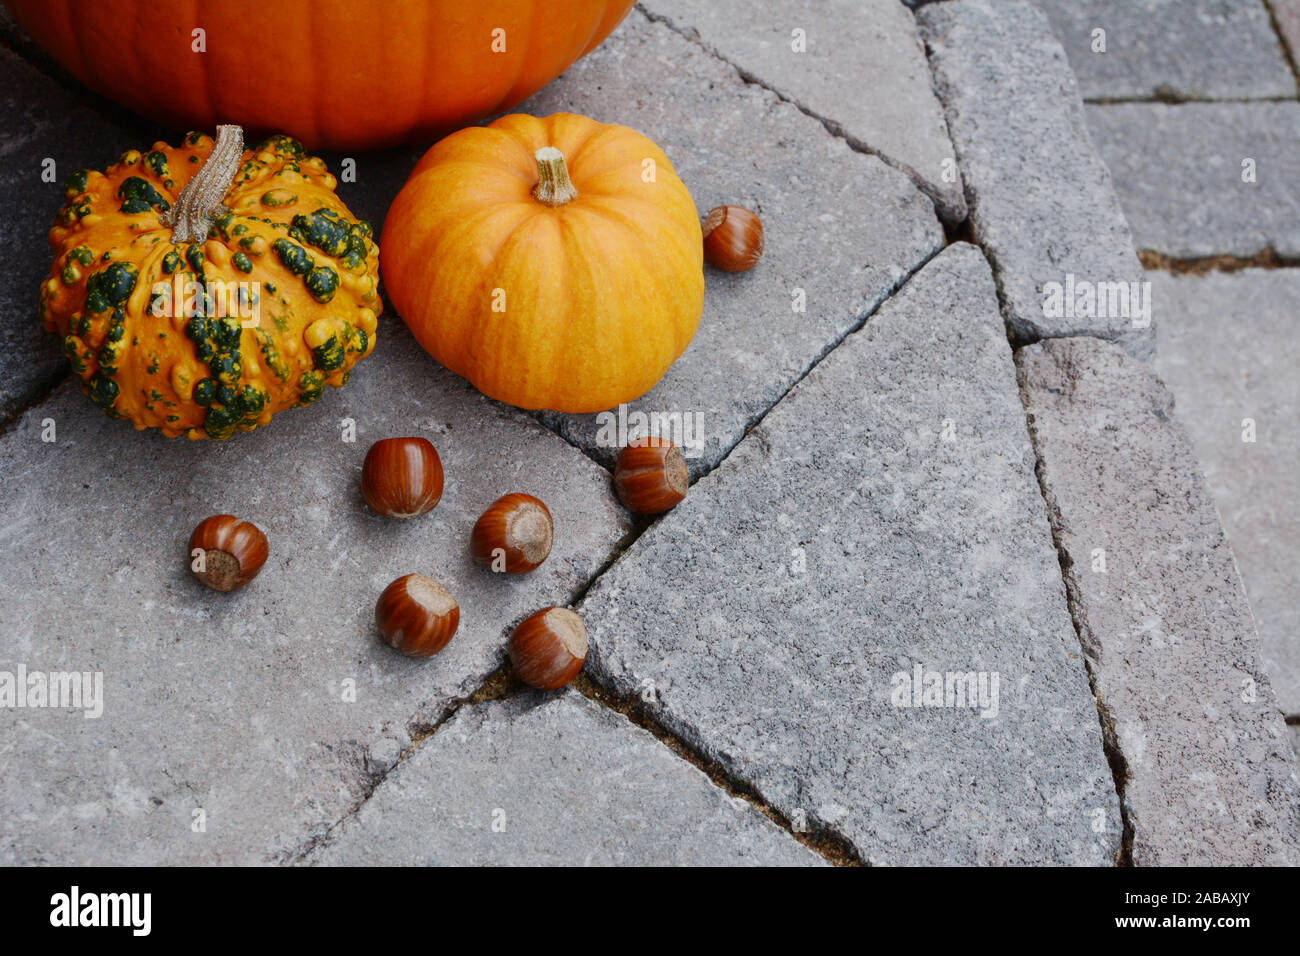 Ornamental gourds and hazelnuts as fall decorations Stock Photo